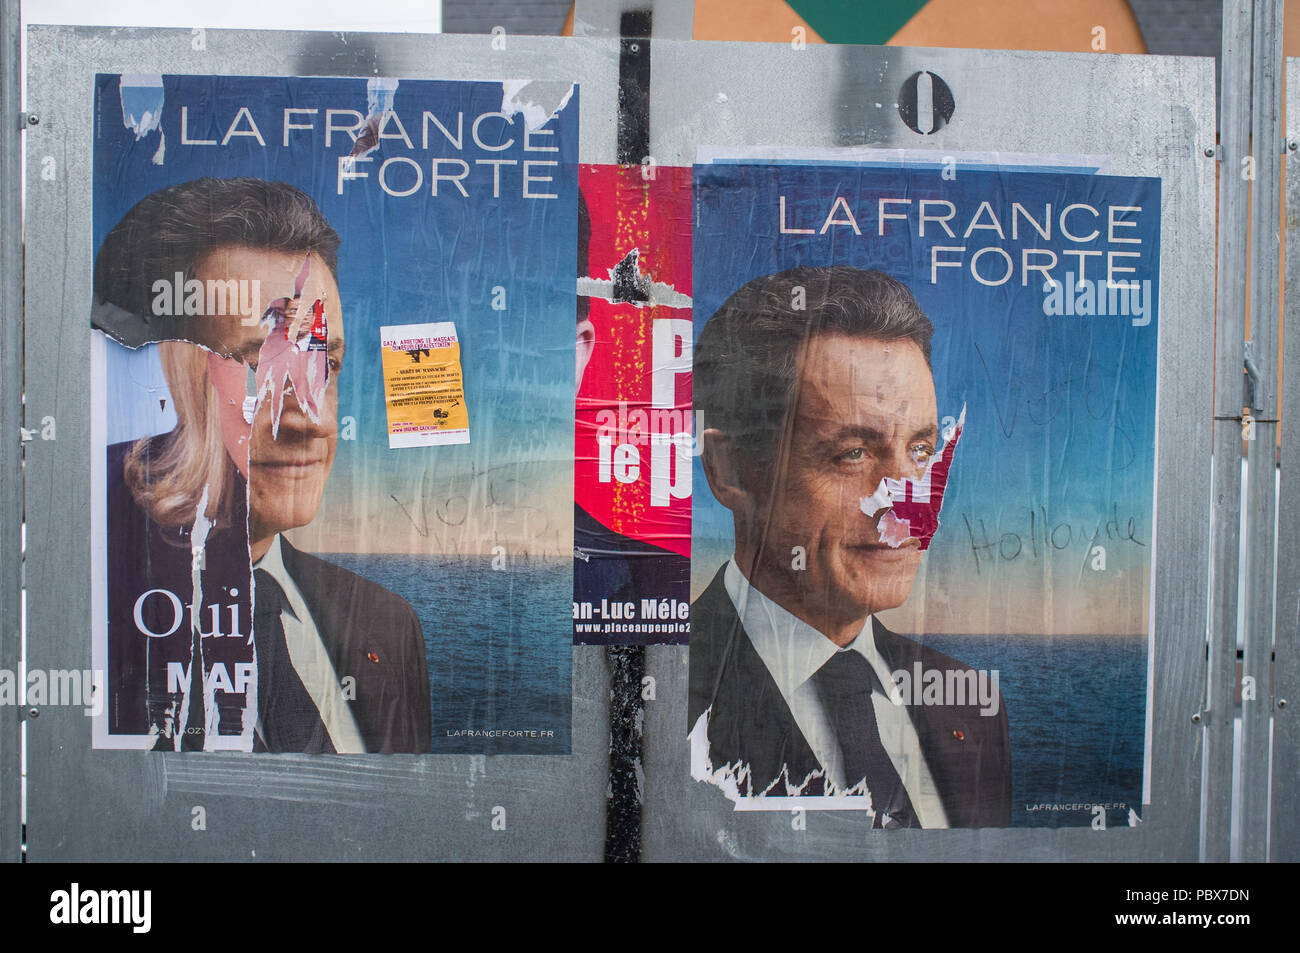 Torn French election poster for Nicolas Sarkozy, 'La France Forte'. Stock Photo